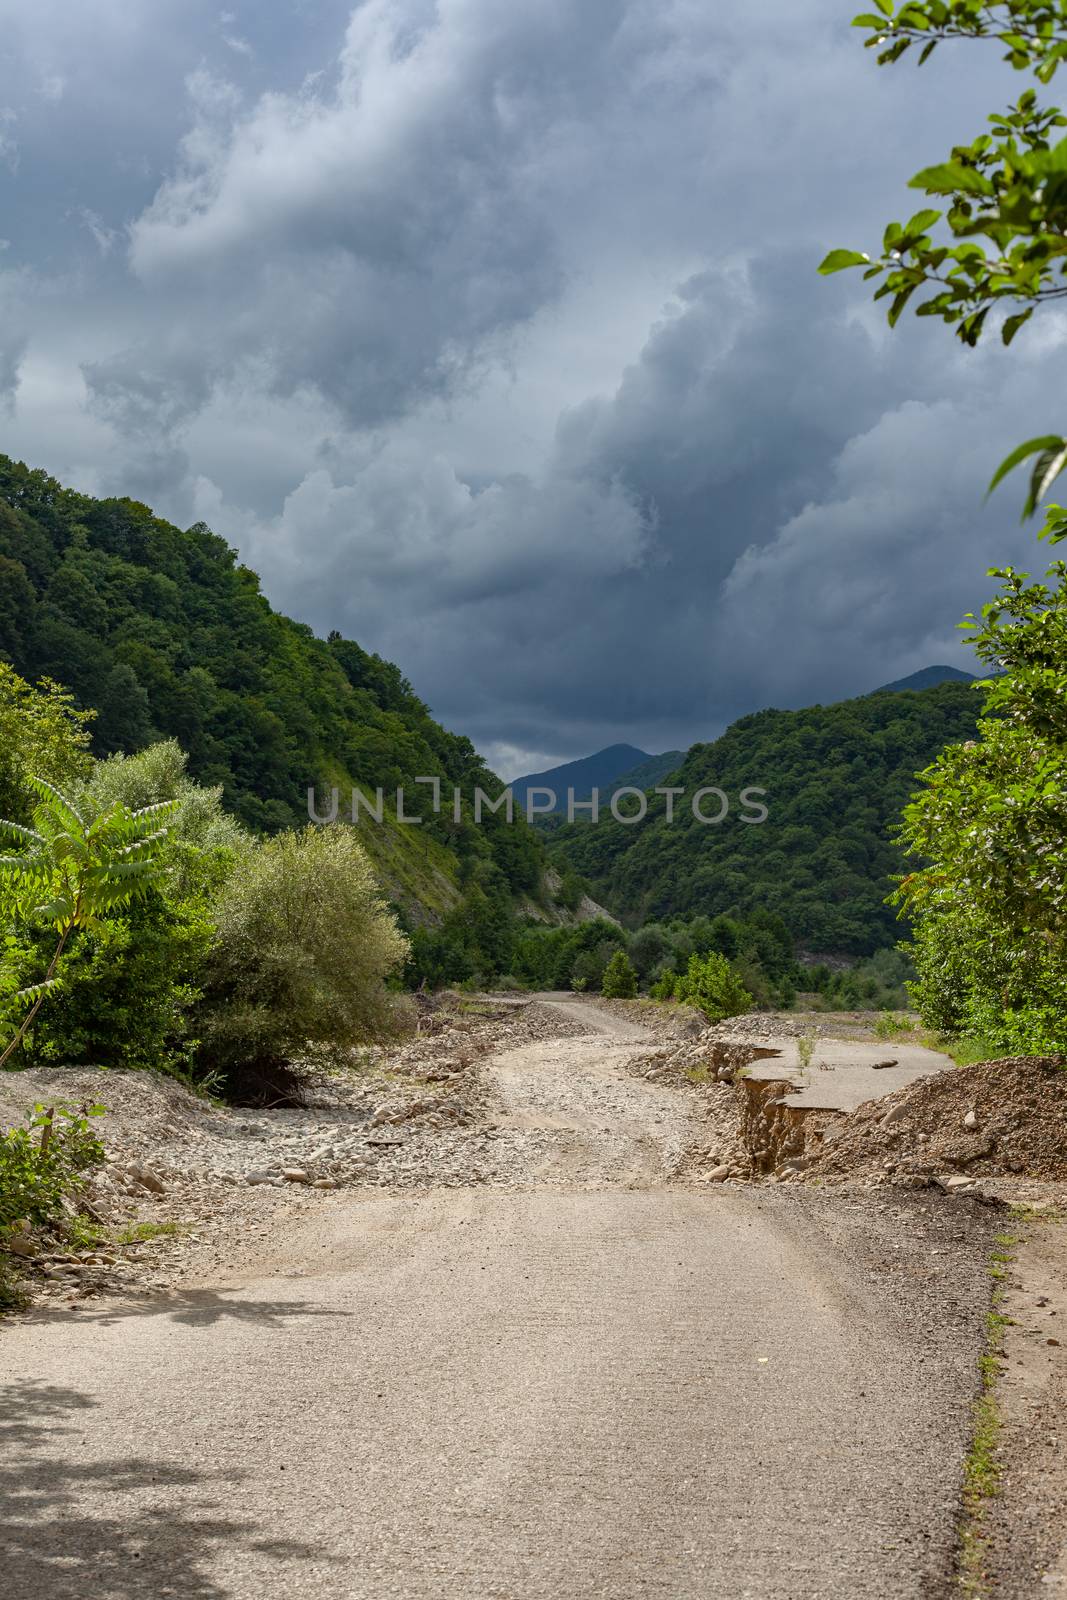 Road in the stonebed of mountain river by Angorius